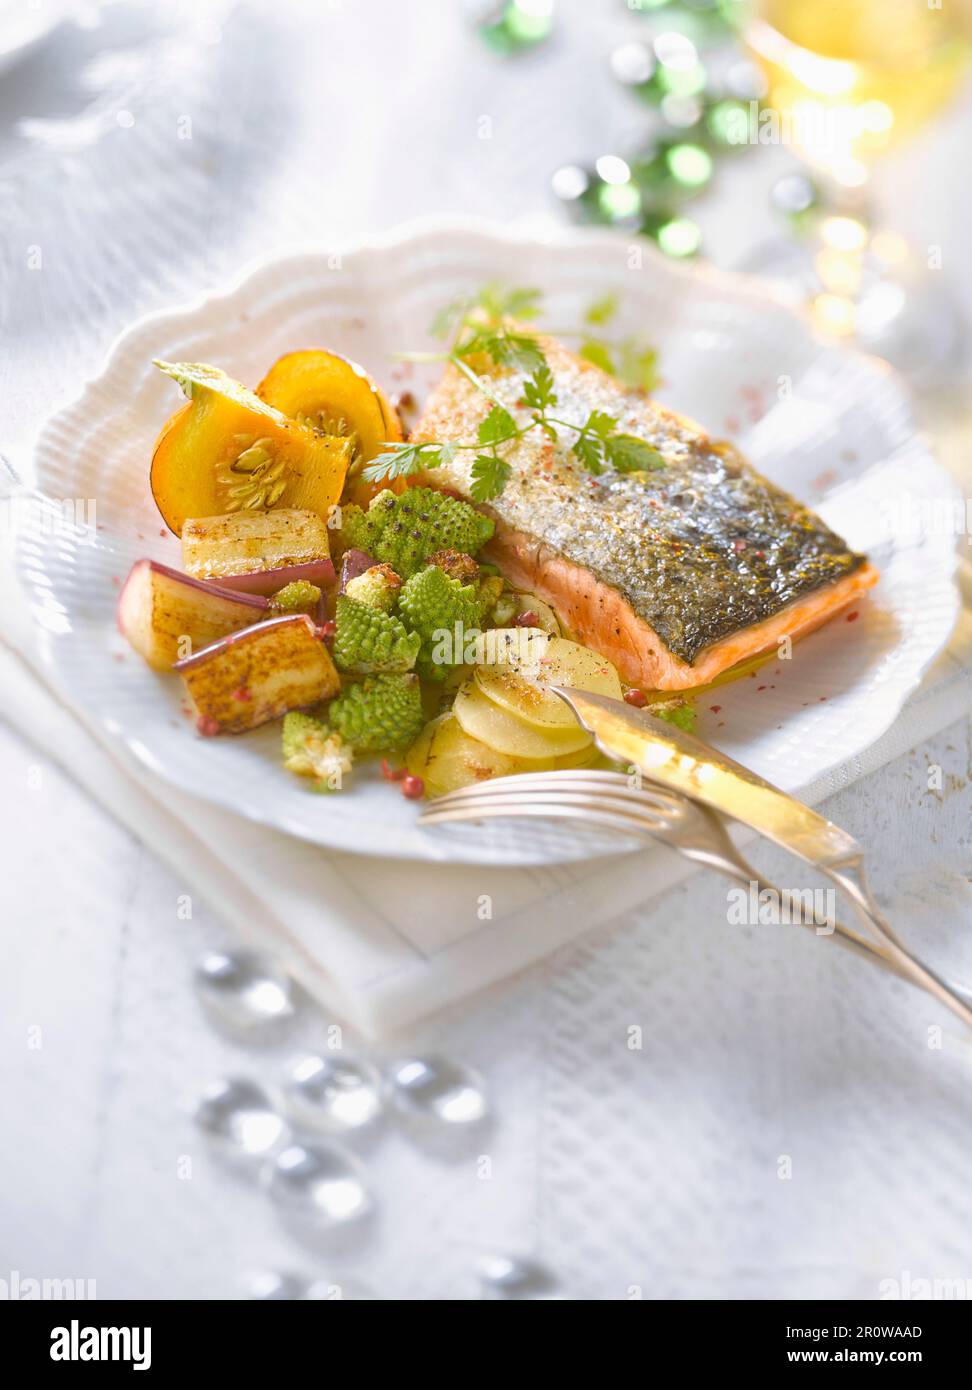 Thick piece of salmon with old-fashioned vegetables Stock Photo